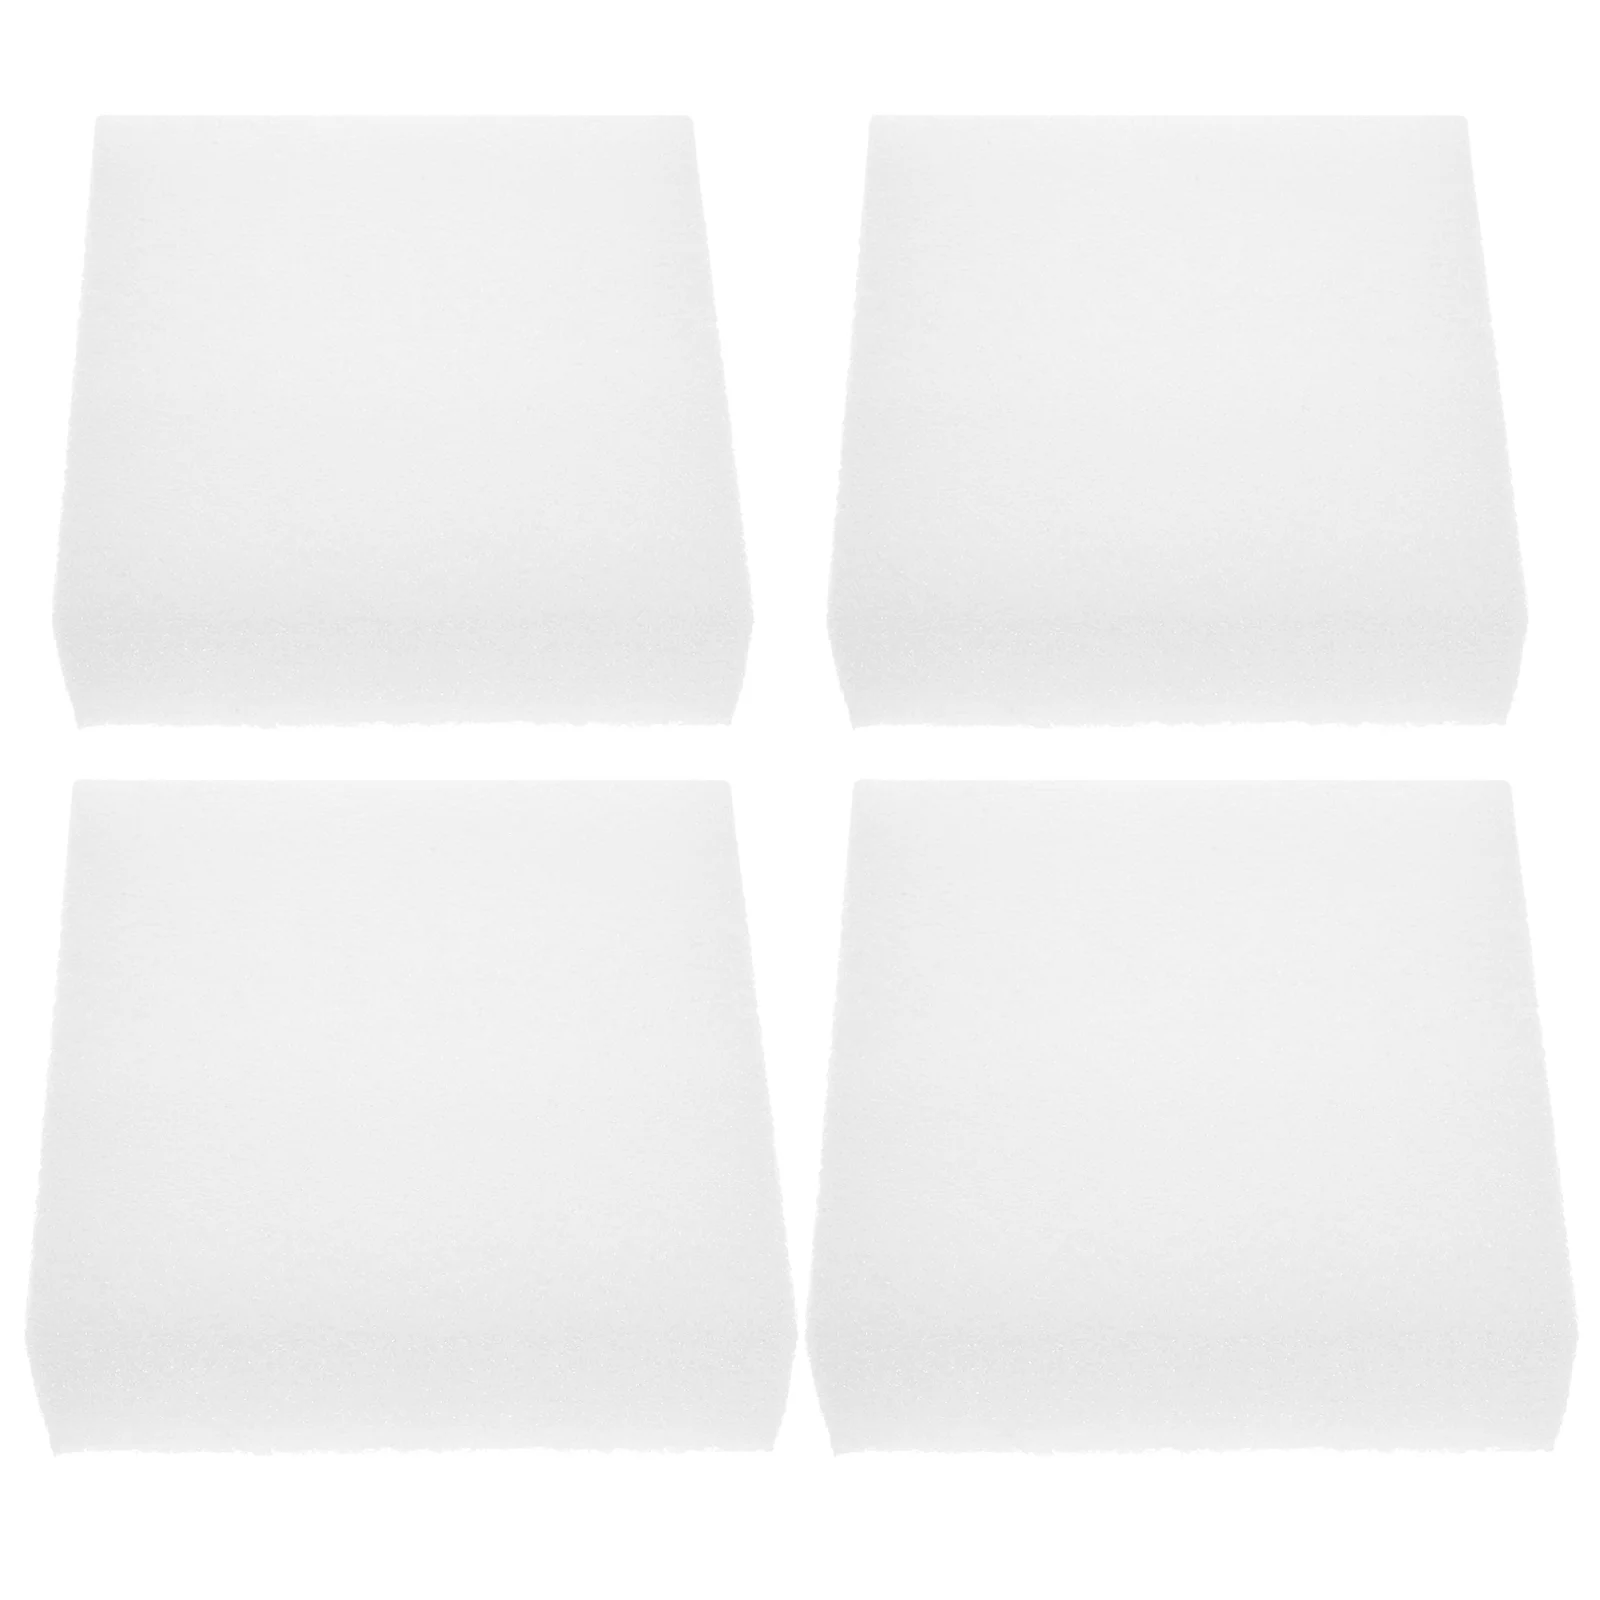 

4 Pcs Foam Pad Board Foams Inserts Wrapping Boards Pearl Cotton Delivery Packing Liner Multi-use